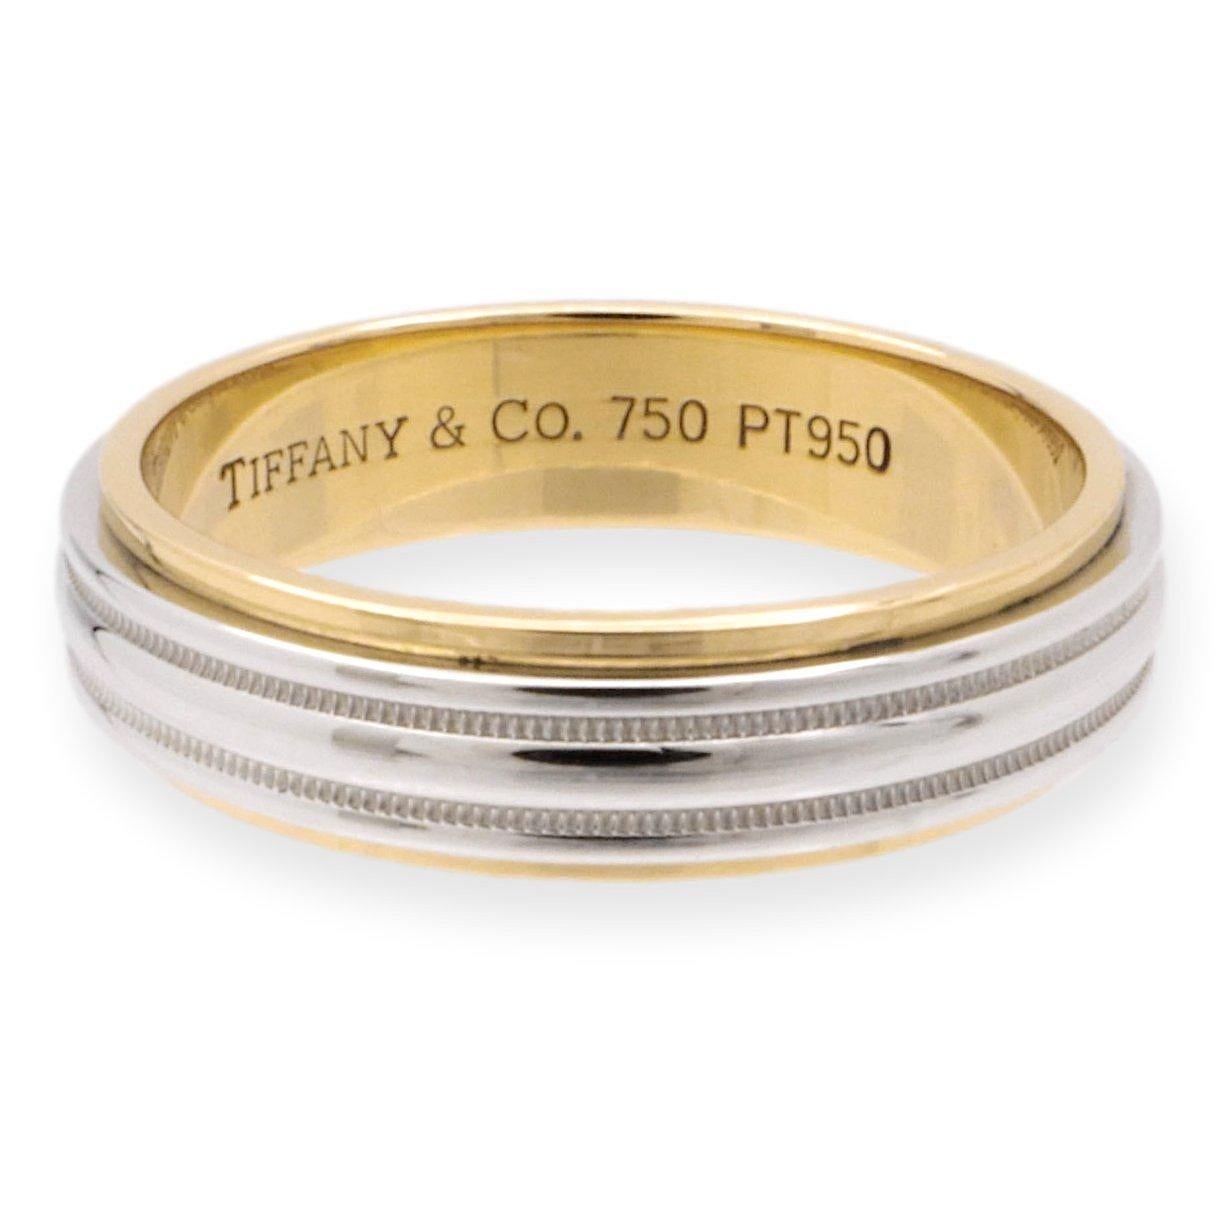 Modern Tiffany & Co. Platinum 18K Together Double Millgrain 6mm Men's Band Ring Size 12